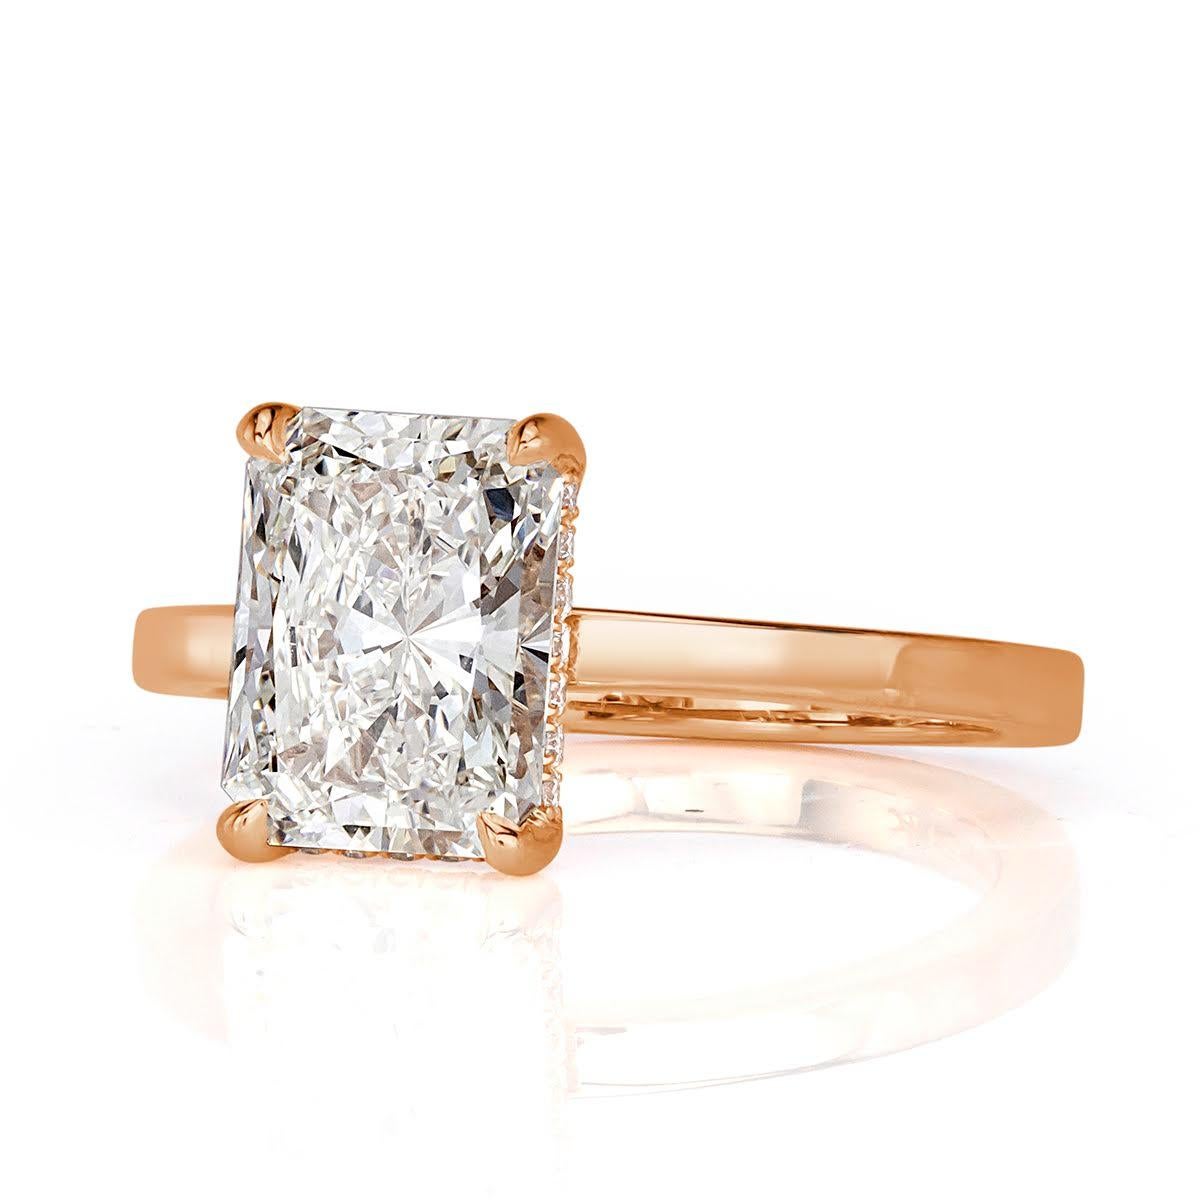 Custom created in our custom 18k rose gold, this one of a kind diamond engagement ring showcases a stunning 2.30ct radiant cut center diamond, GIA certified at I in color, VVS2 in clarity. This hand picked diamond is graded at excellence in polish